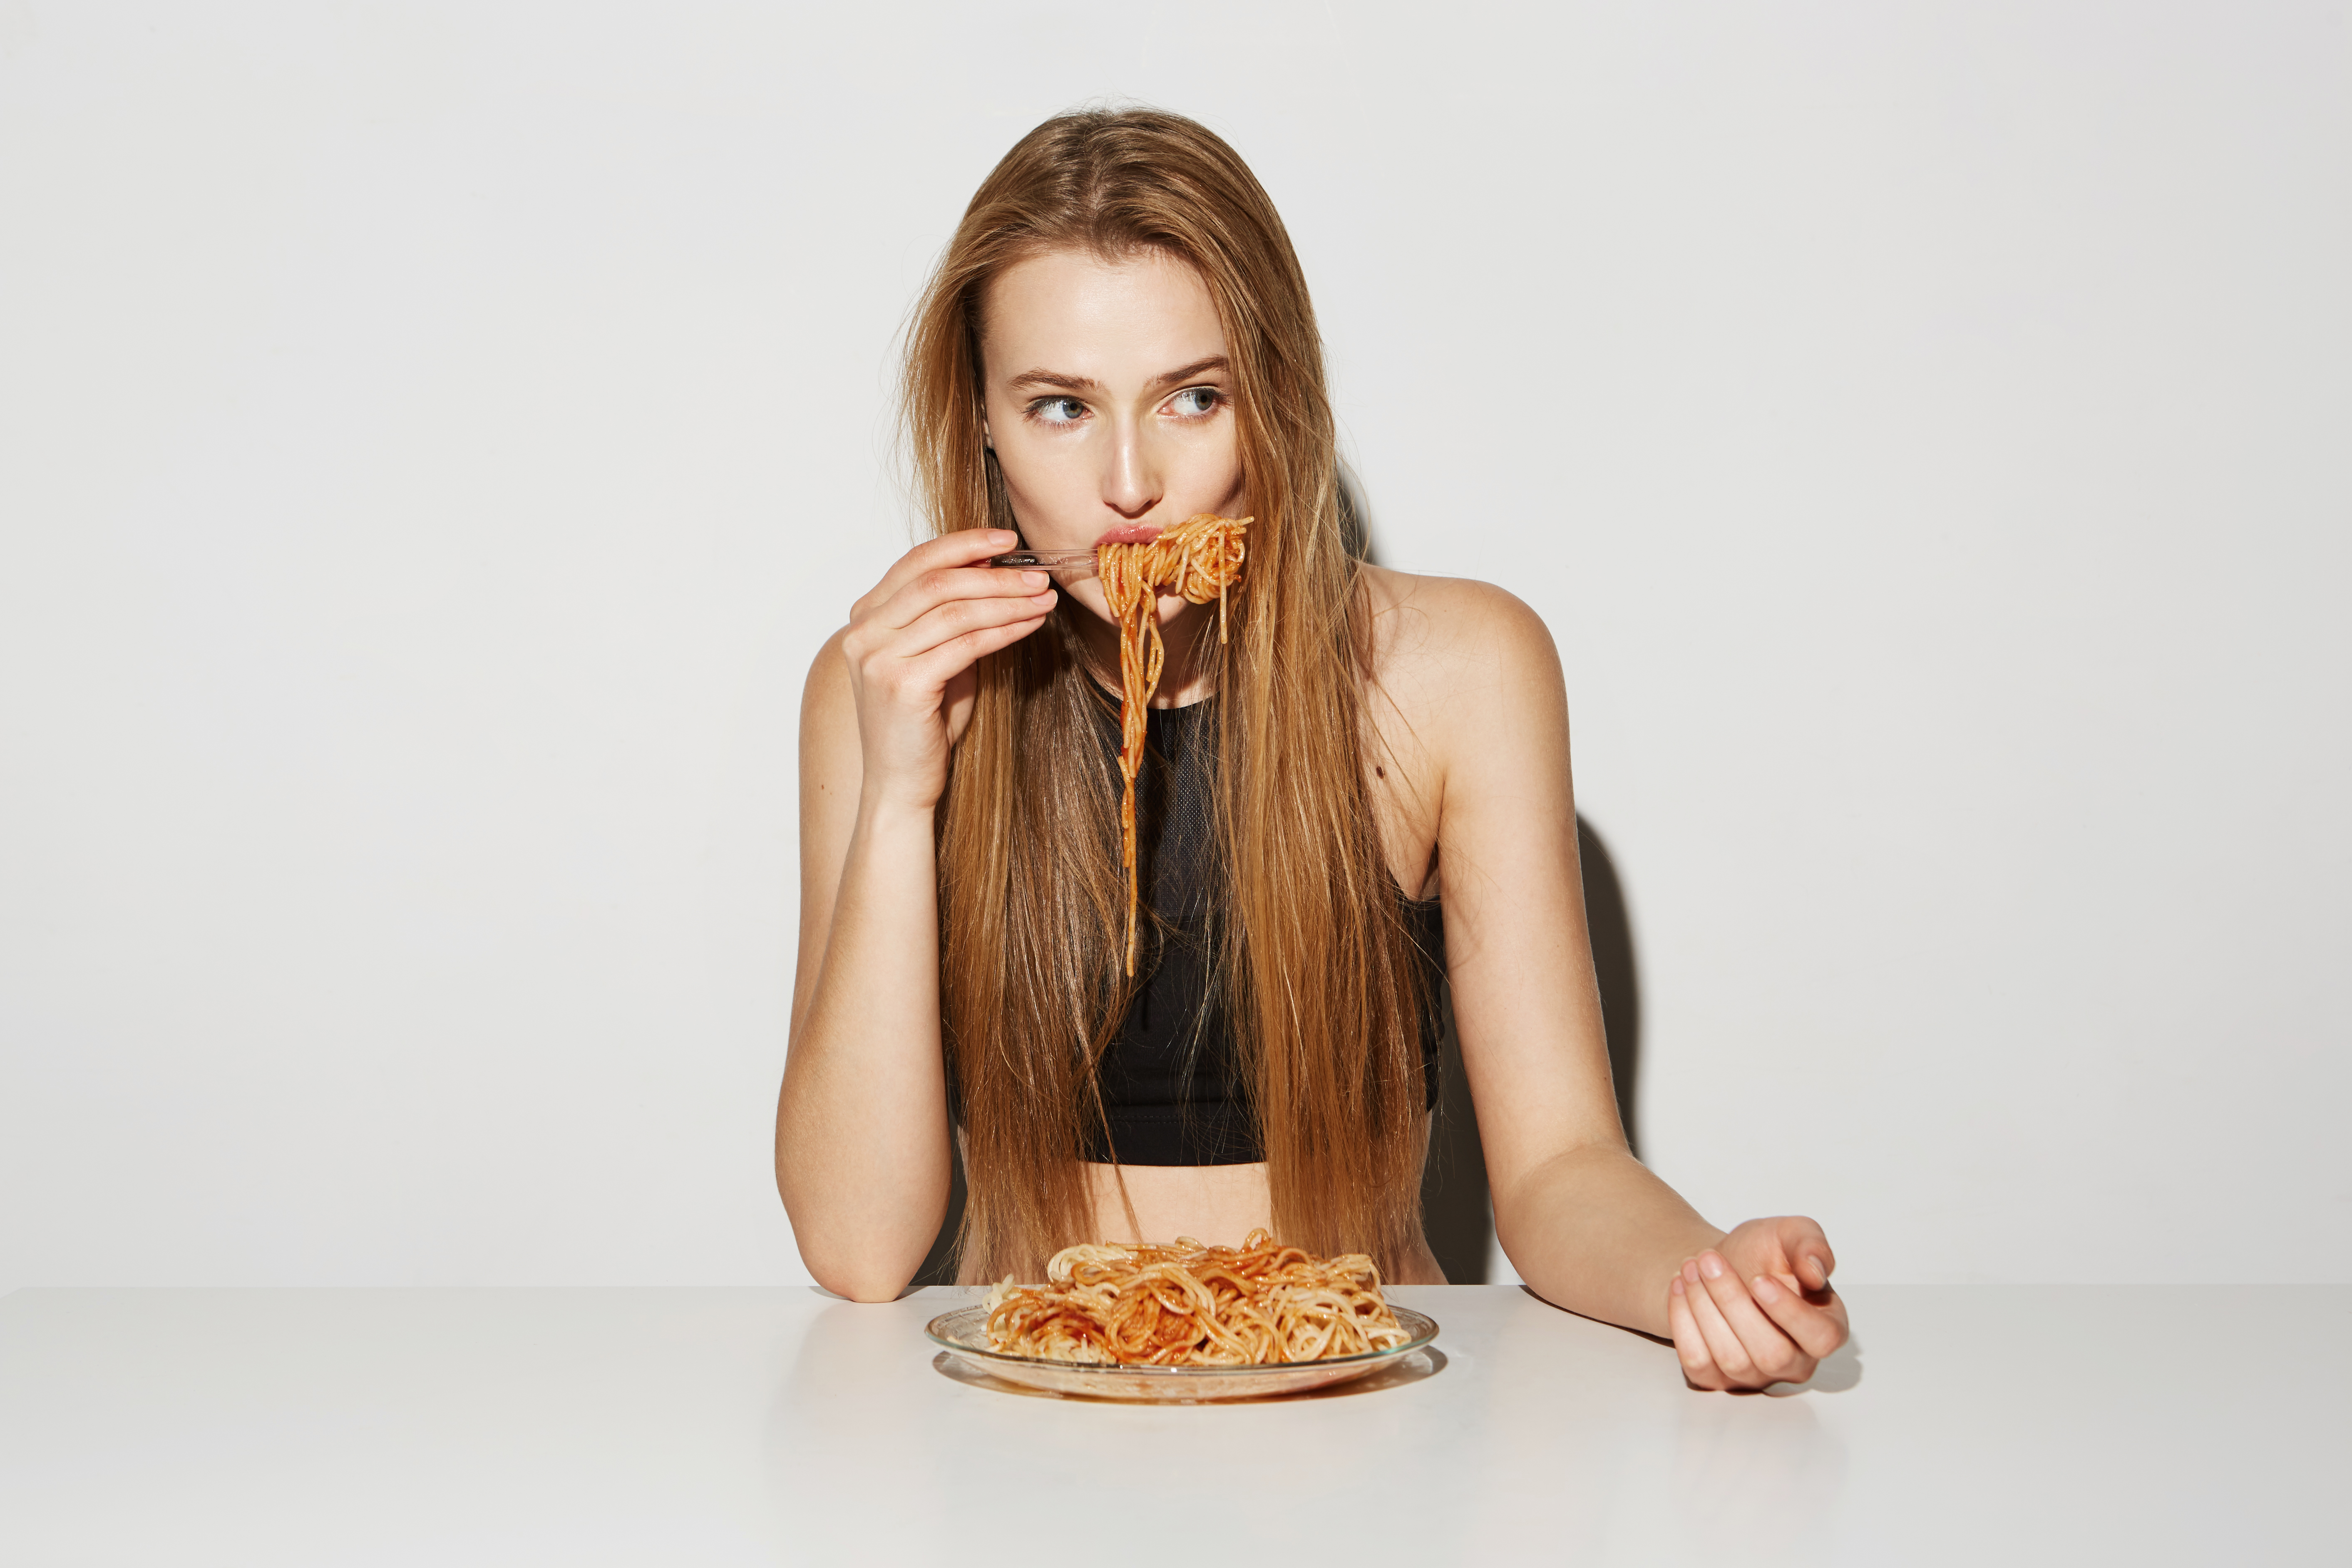 Close up portrait of sexy blonde girl with long hair sitting at table, eating spaghetti, looking aside with relaxed and flirty expression.